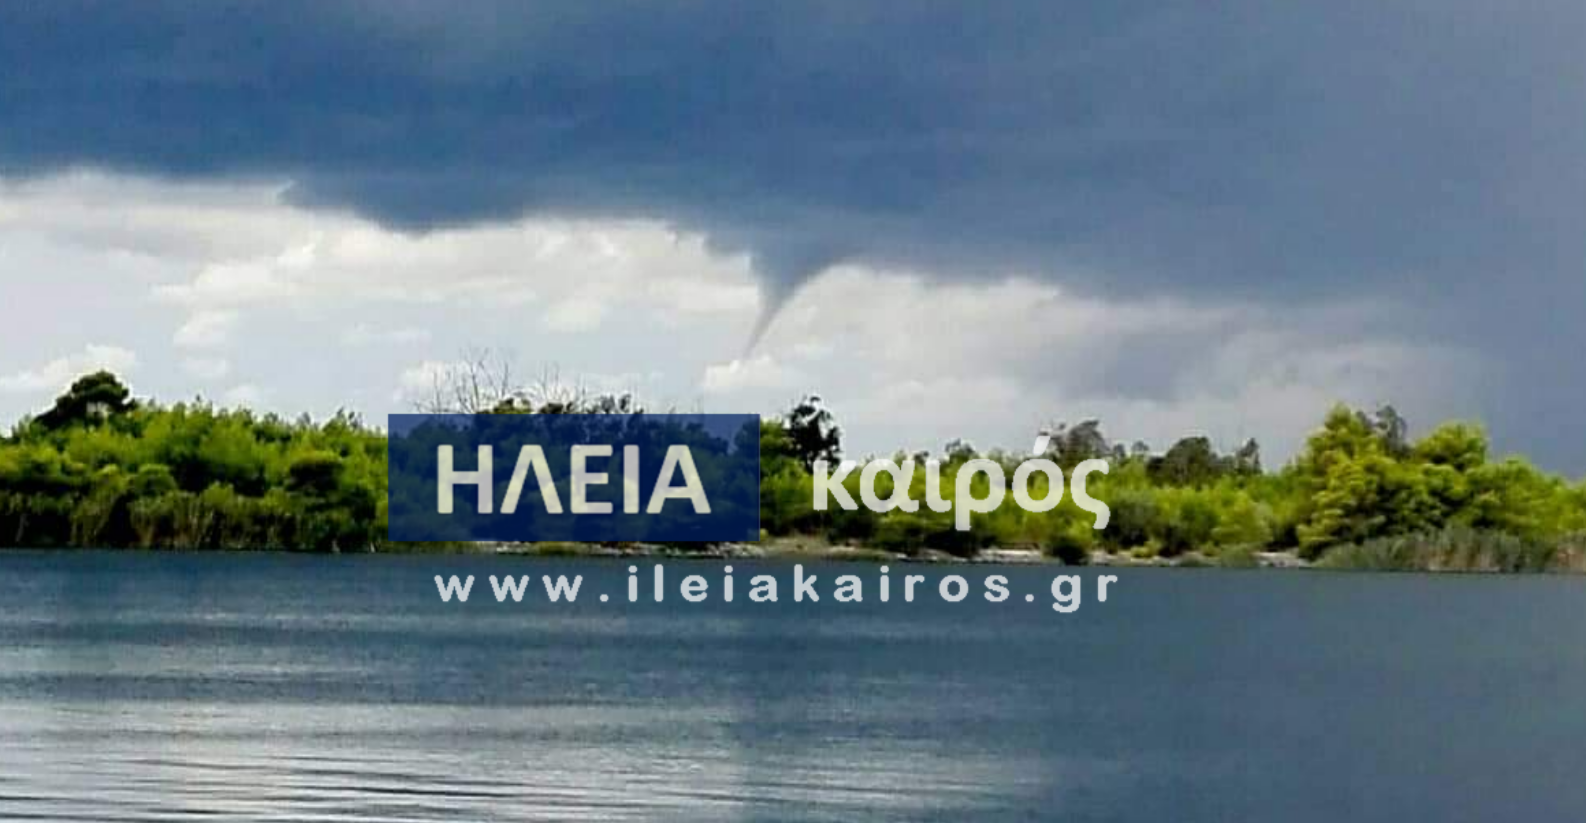 You are currently viewing Πολλές χοάνες (funnel clouds) σχηματίστηκαν στα παράκτια της Ηλείας (φώτο)